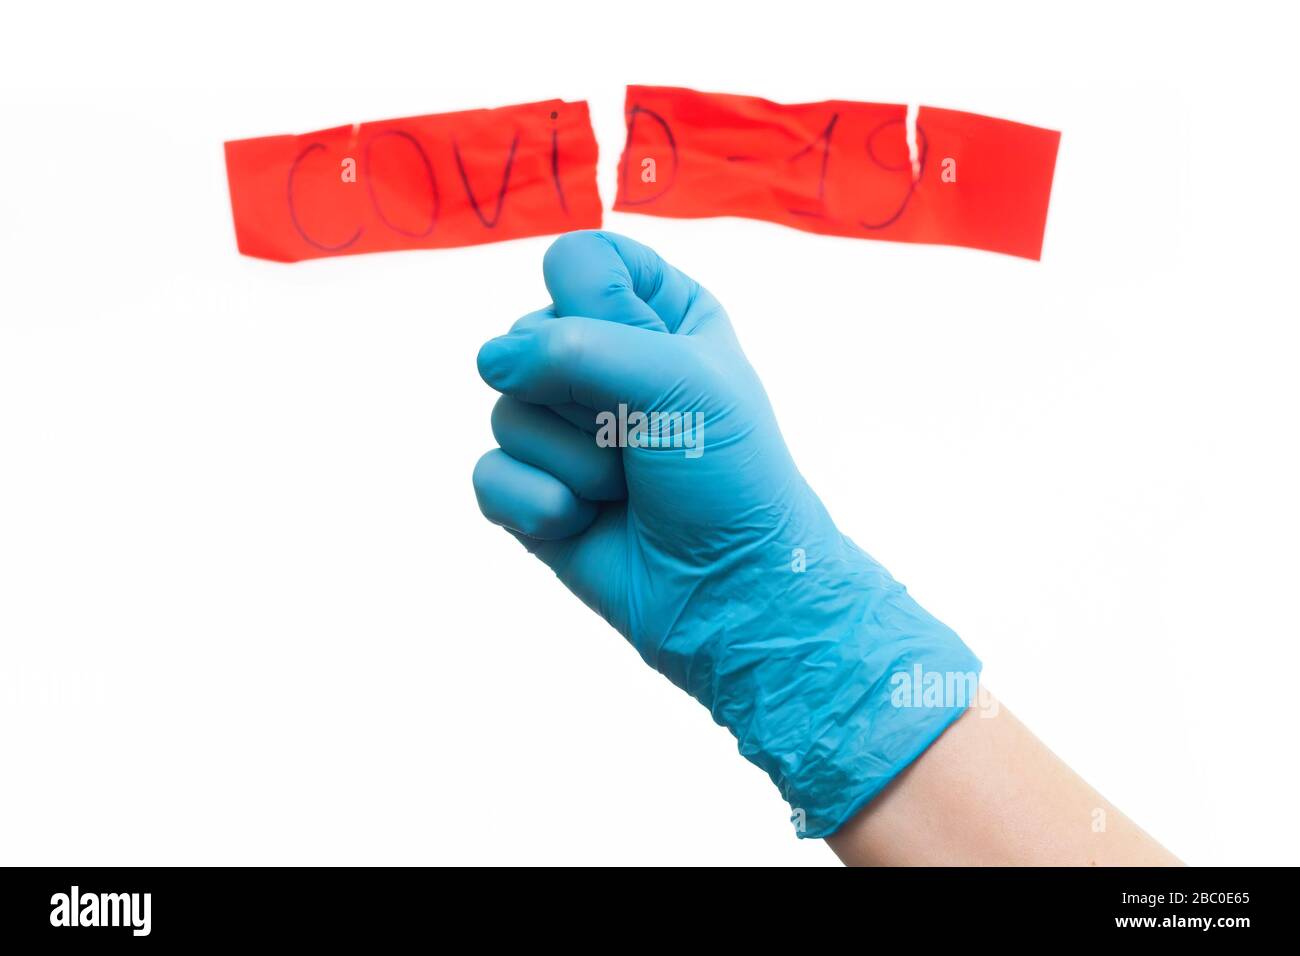 Medics defeated coronavirus. Concept. Hand in a medical glove with a red label of coronavirus Stock Photo